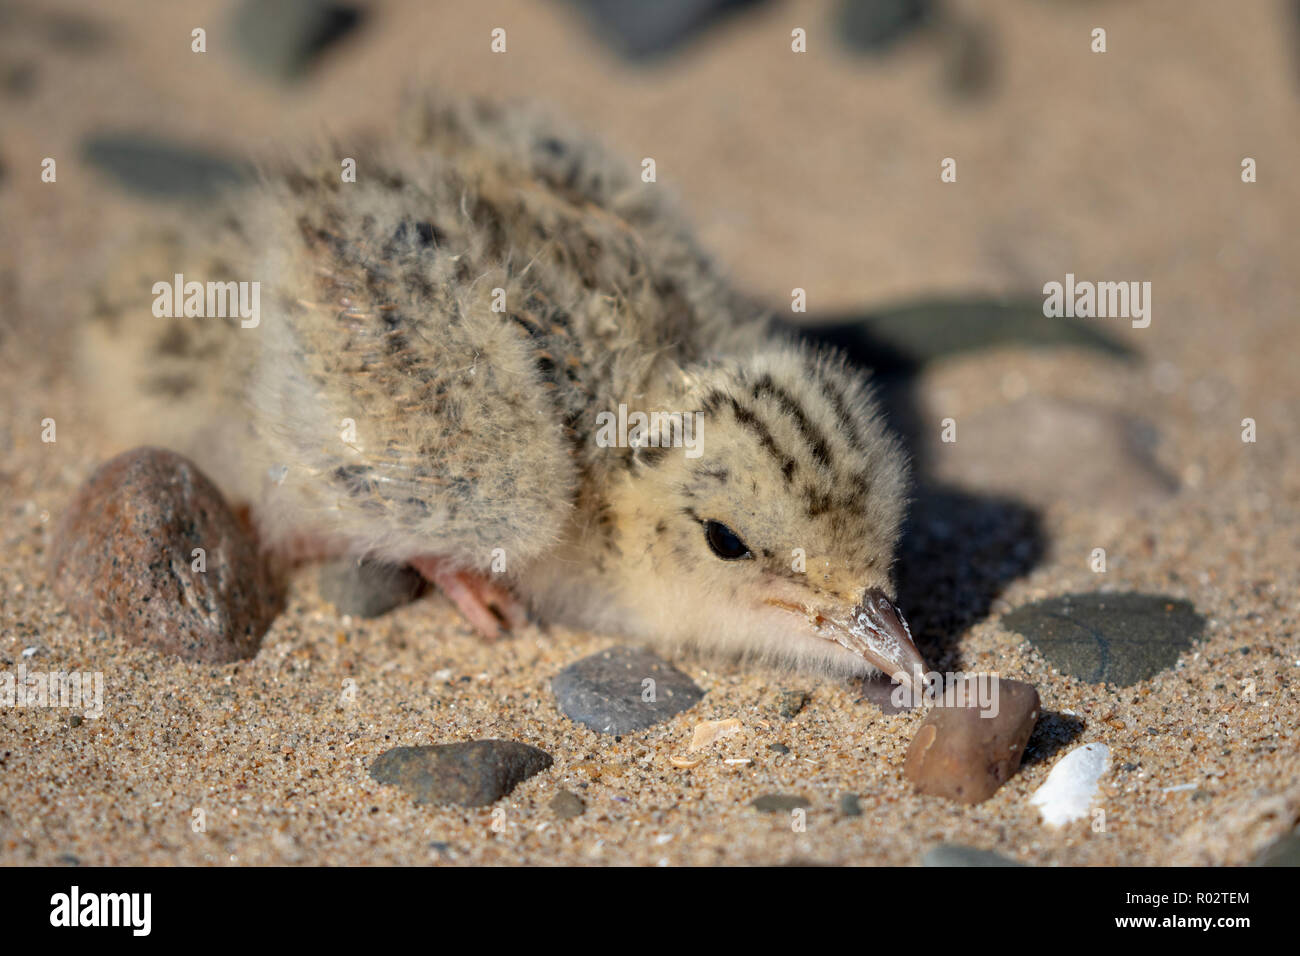 a little tern chick (Sternula albifrons) camouflaged in the sand at Gronant, North Wales. Photo taken under NRW licence. Stock Photo